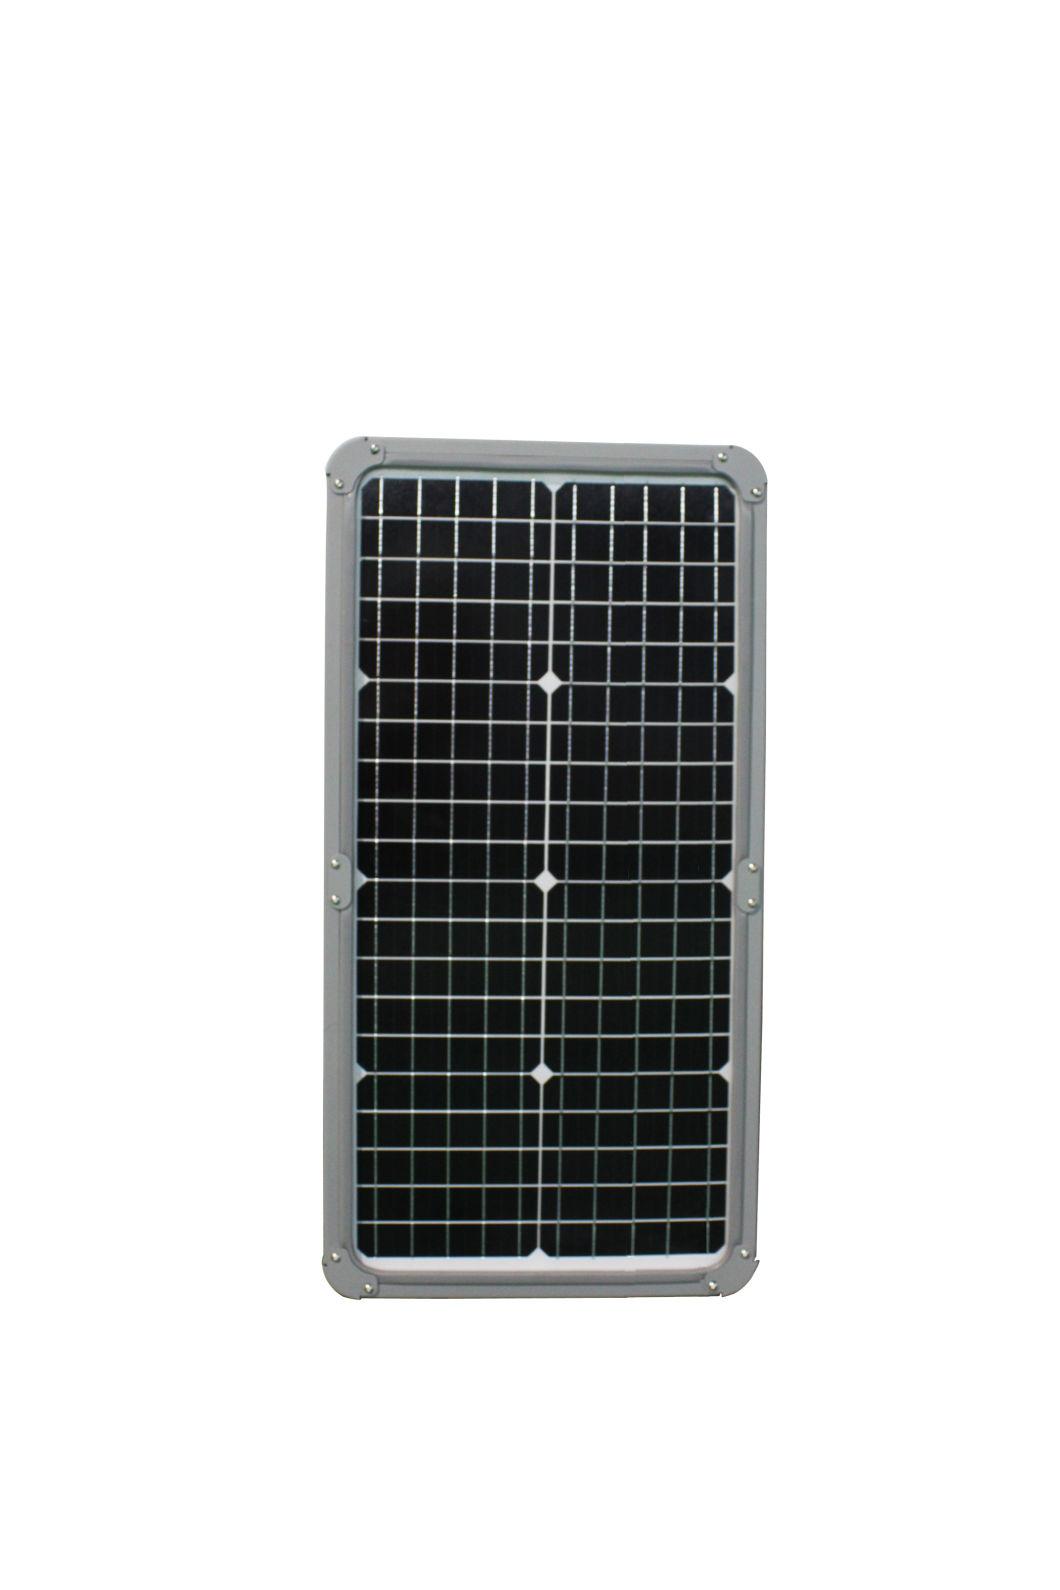 Integrated All in One Solar LED Street Light Fixtures 30W